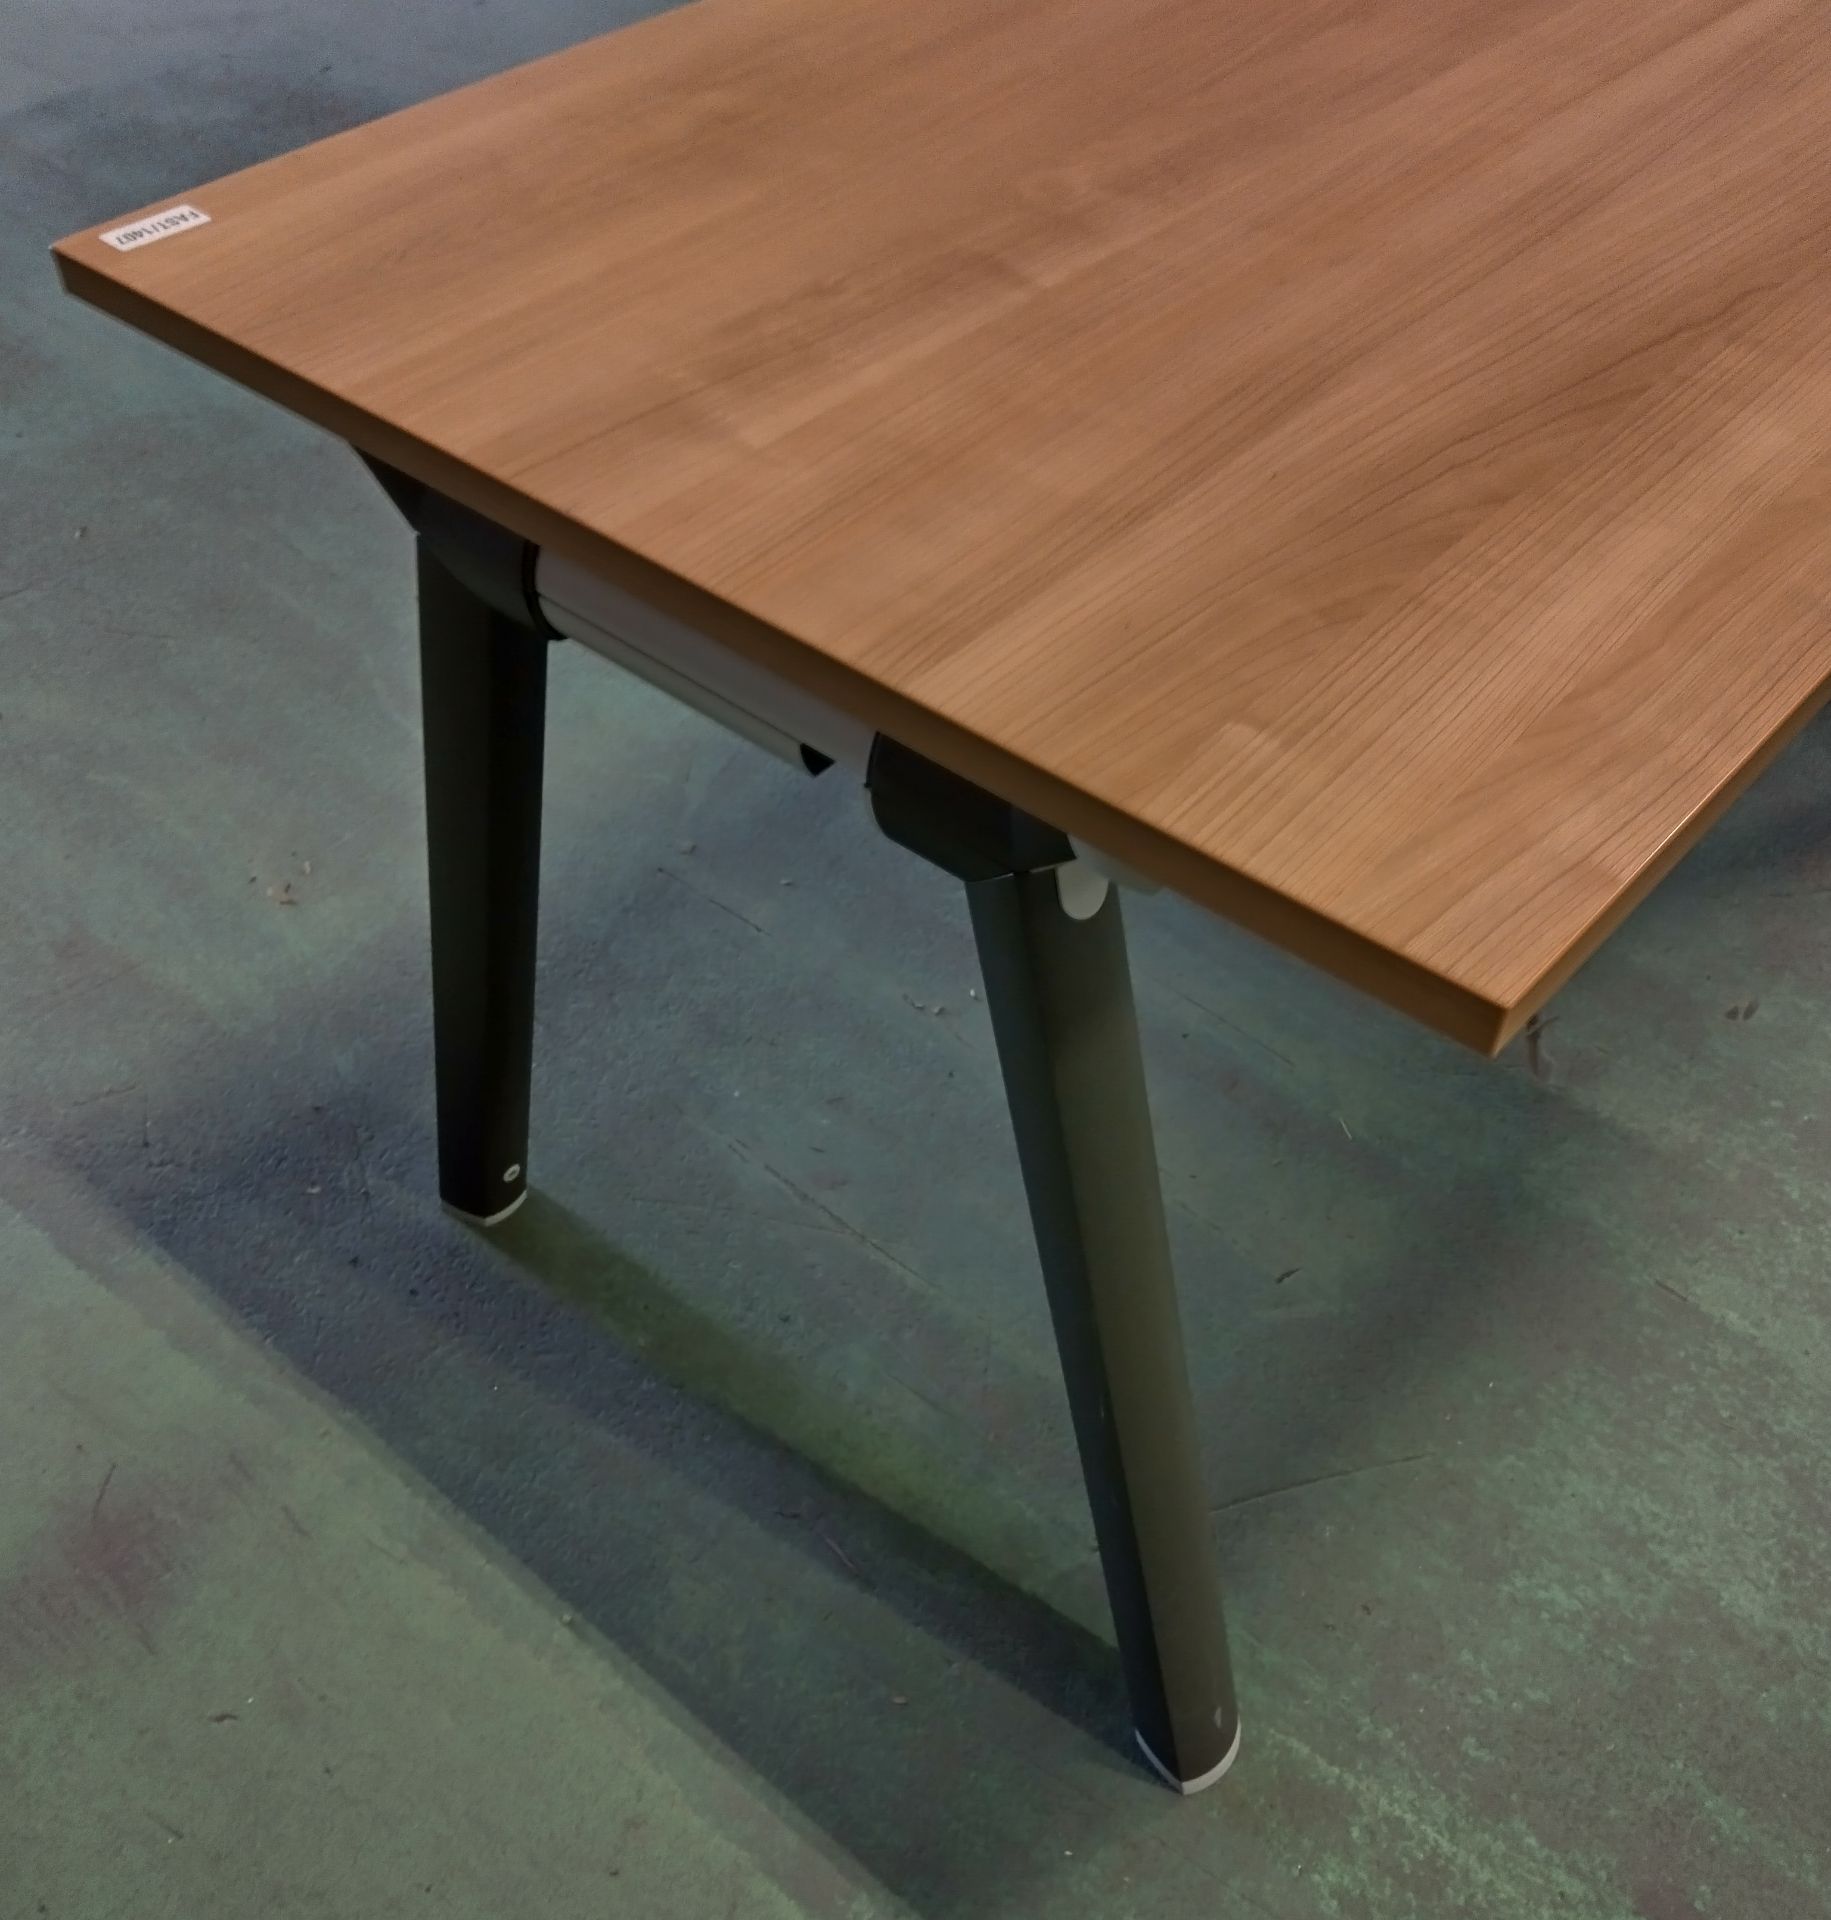 Wooden office desk - L 1400 x W 800 x H 730mm - Image 2 of 2